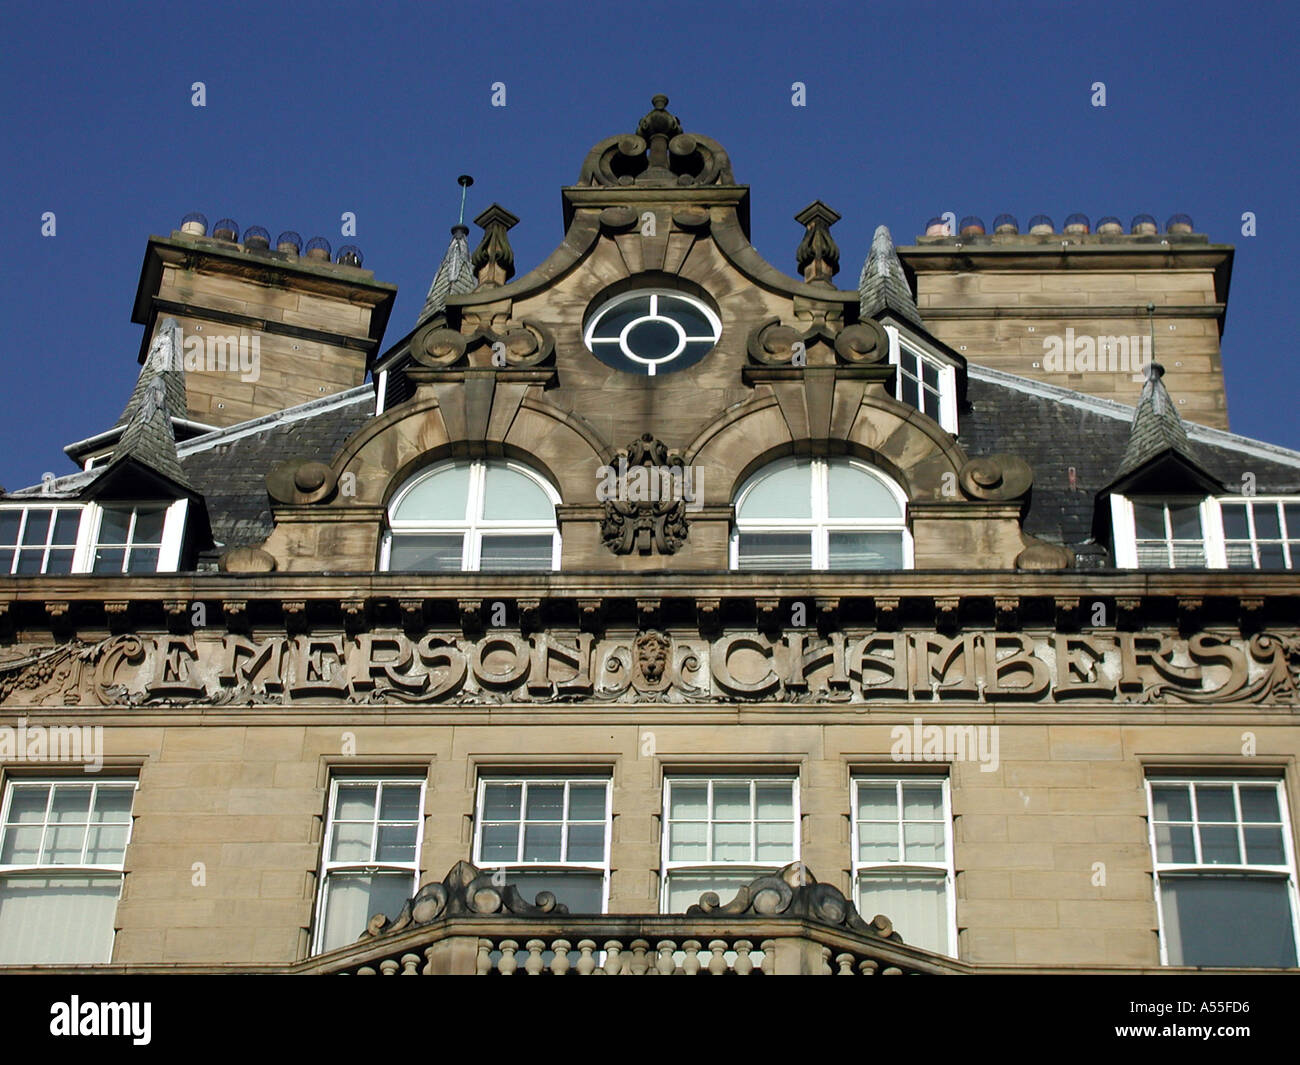 Emerson Édifice Chambers Newcastle upon Tyne Banque D'Images